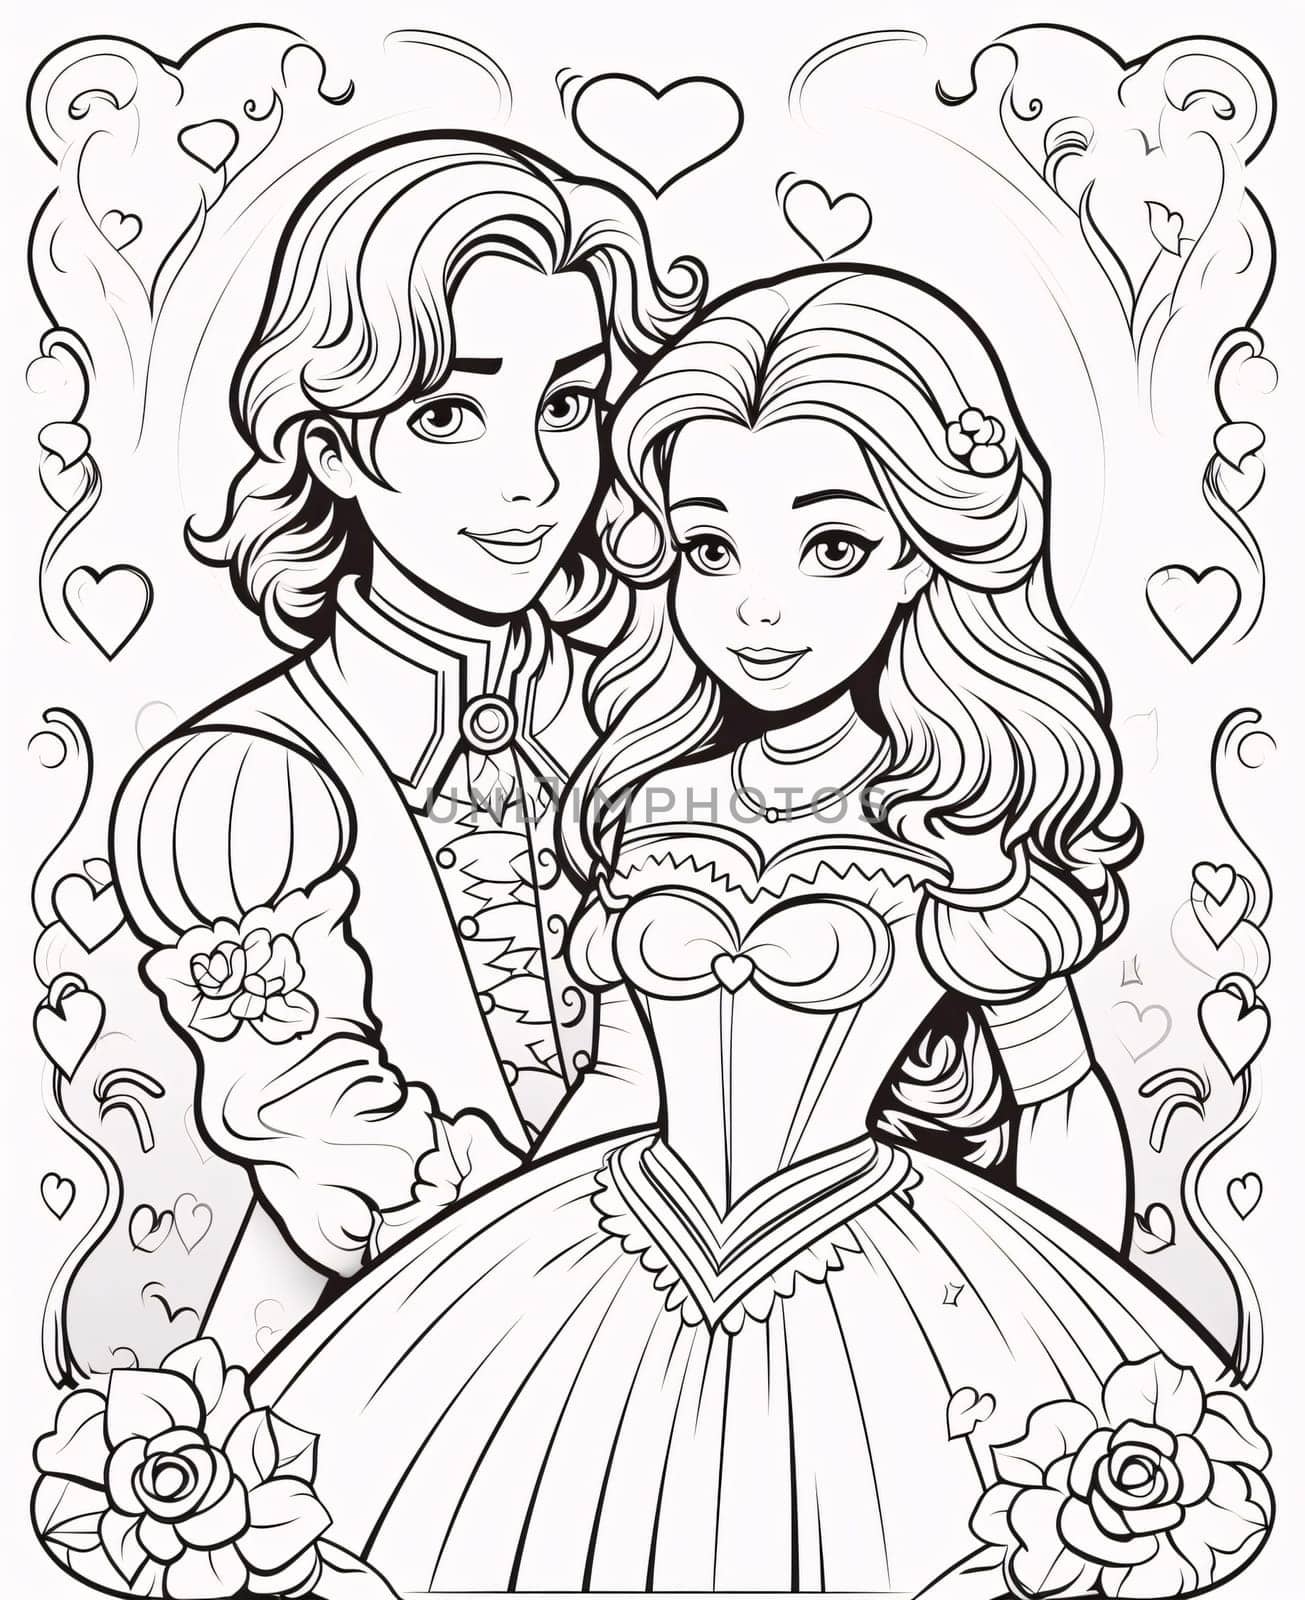 Black and white coloring sheet, a young prince and a princess. Valentine's Day as a day symbol of affection and love. by ThemesS